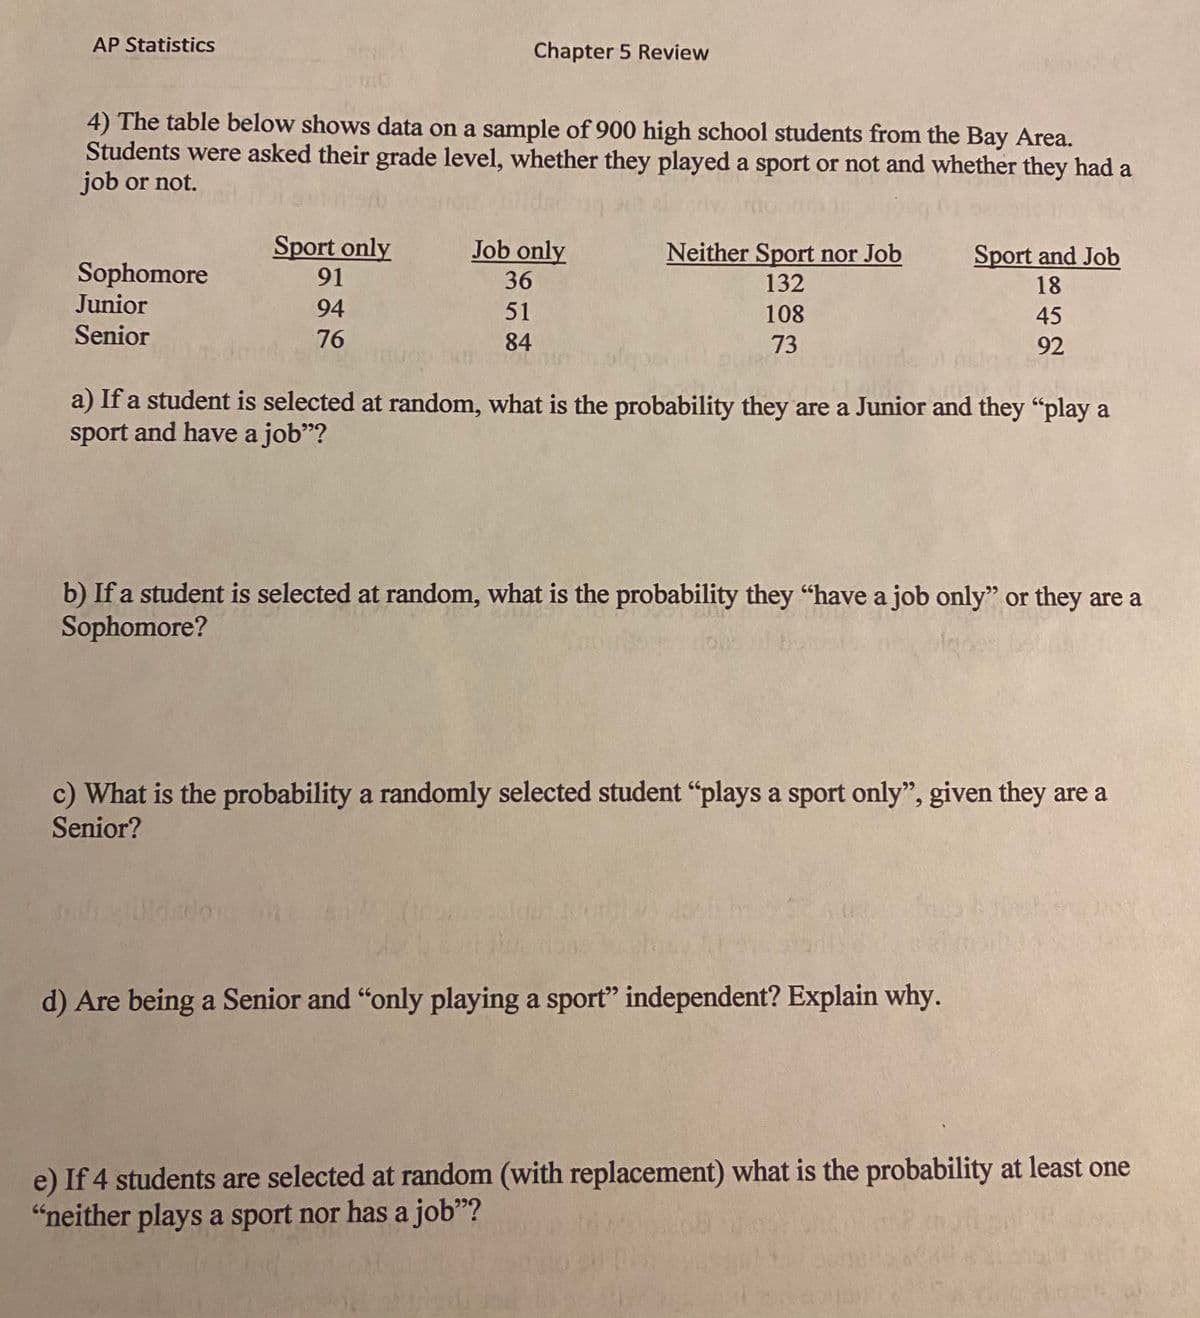 AP Statistics
Chapter 5 Review
4) The table below shows data on a sample of 900 high school students from the Bay Area.
Students were asked their grade level, whether they played a sport or not and whether they had a
job or not.
Sport only
Job only
Neither Sport nor Job
Sport and Job
Sophomore
Junior
91
36
132
18
94
51
108
45
Senior
76
84
73
92
a) If a student is selected at random, what is the probability they are a Junior and they "play a
sport and have a job"?
b) If a student is selected at random, what is the probability they "have a job only" or they are a
Sophomore?
c) What is the probability a randomly selected student "plays a sport only", given they are a
Senior?
d) Are being a Senior and "only playing a sport" independent? Explain why.
e) If 4 students are selected at random (with replacement) what is the probability at least one
"neither plays a sport nor has a job"?
